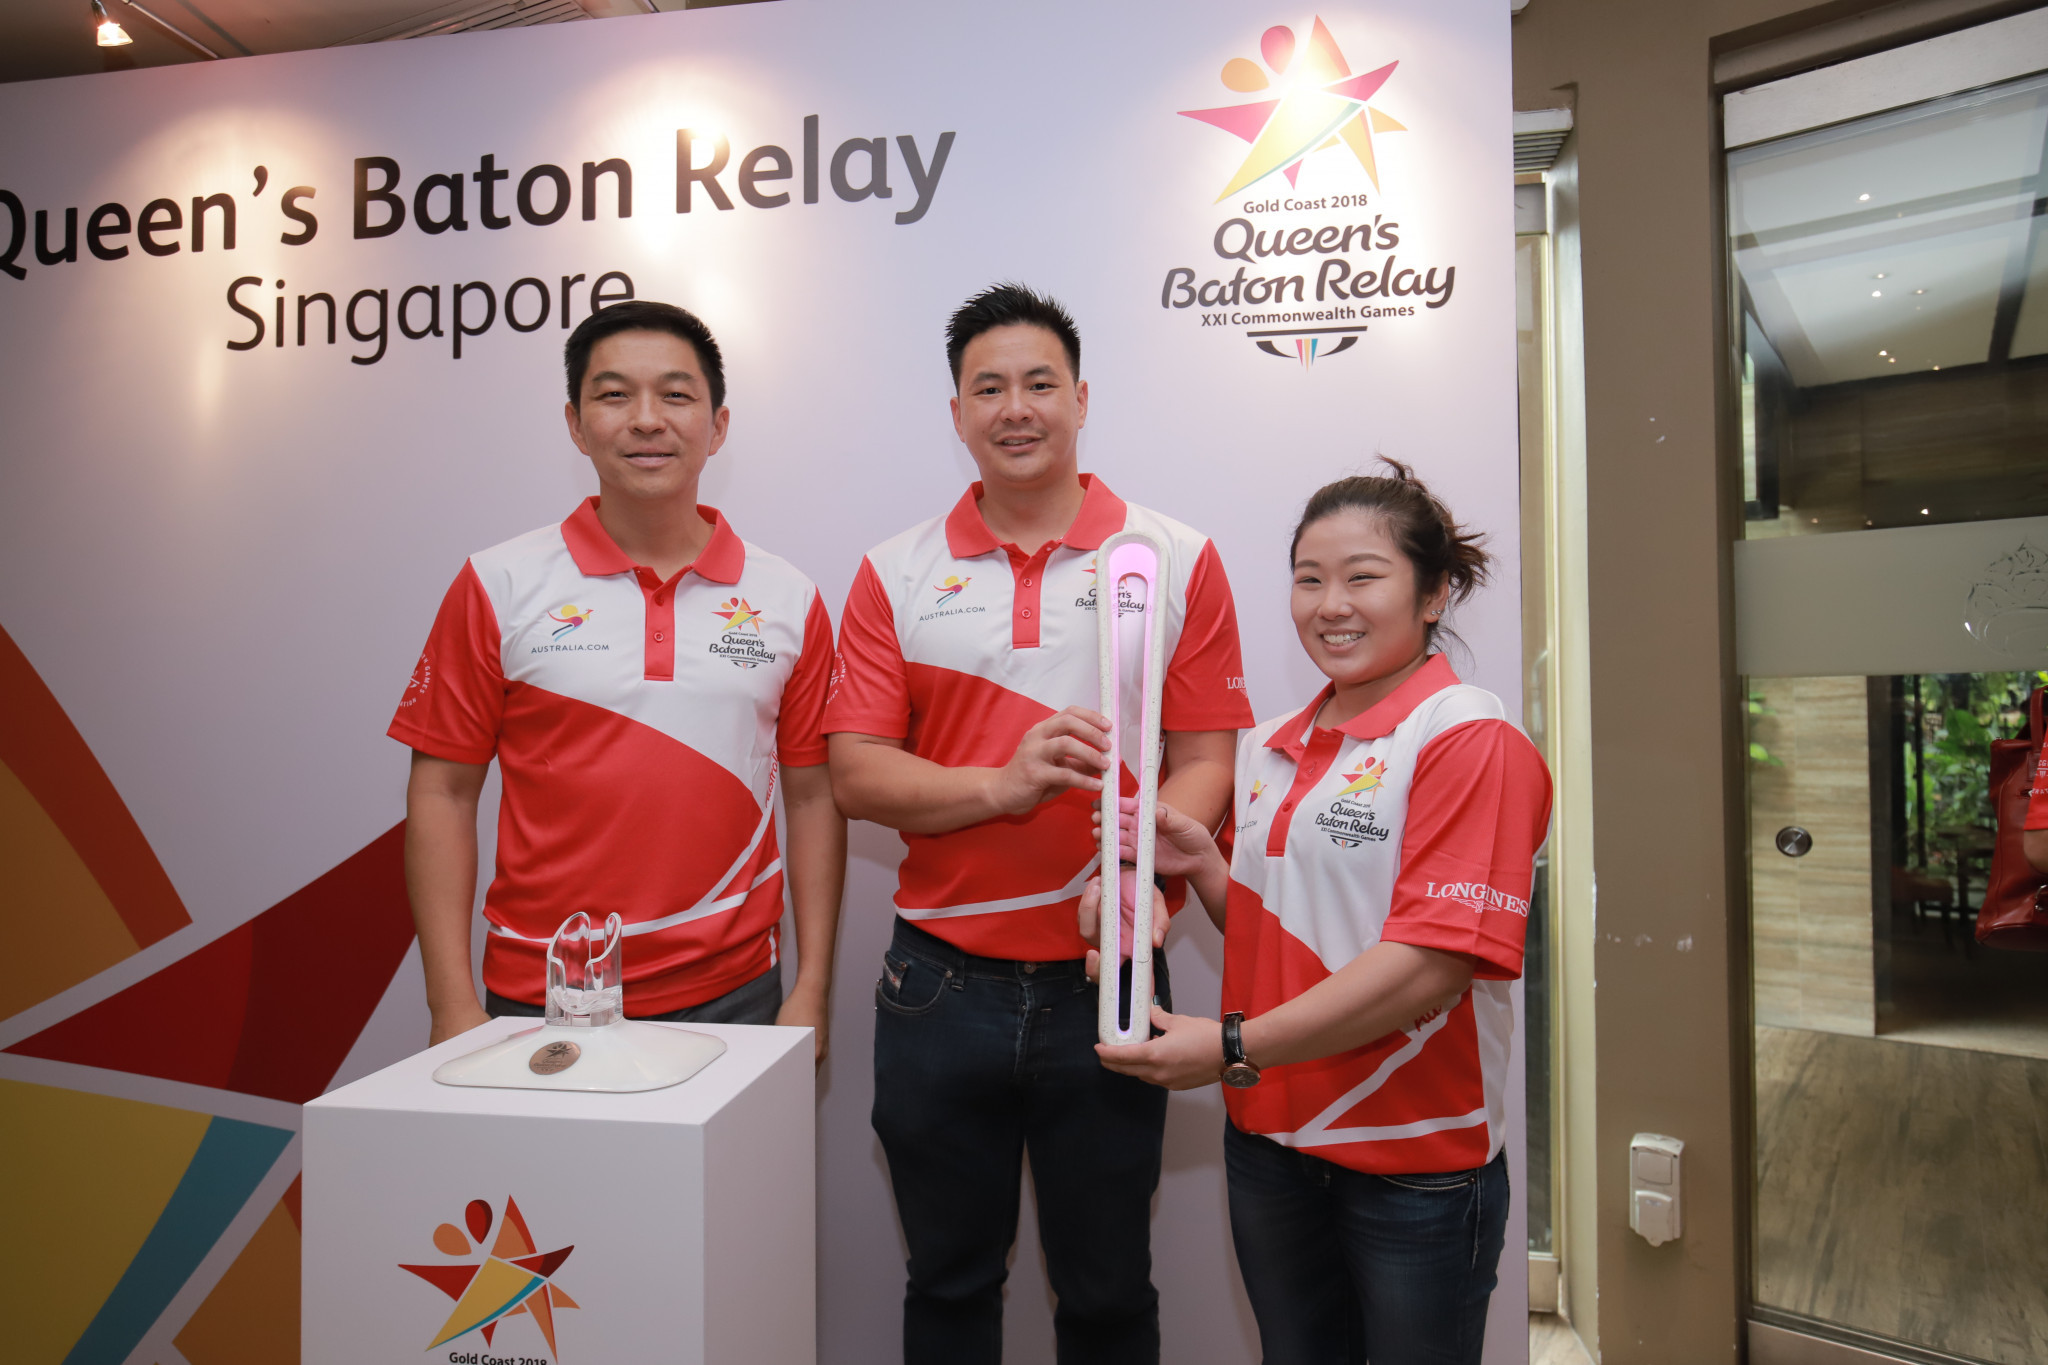 The appointment of Mark Chay, middle, and Lim Heem Wei, right, as the Chef de Mission and Assistant Chef de Mission for Gold Coast 2018 was announced to coincide with the arrival of the Queen's Baton Relay in Singapore ©SNOC